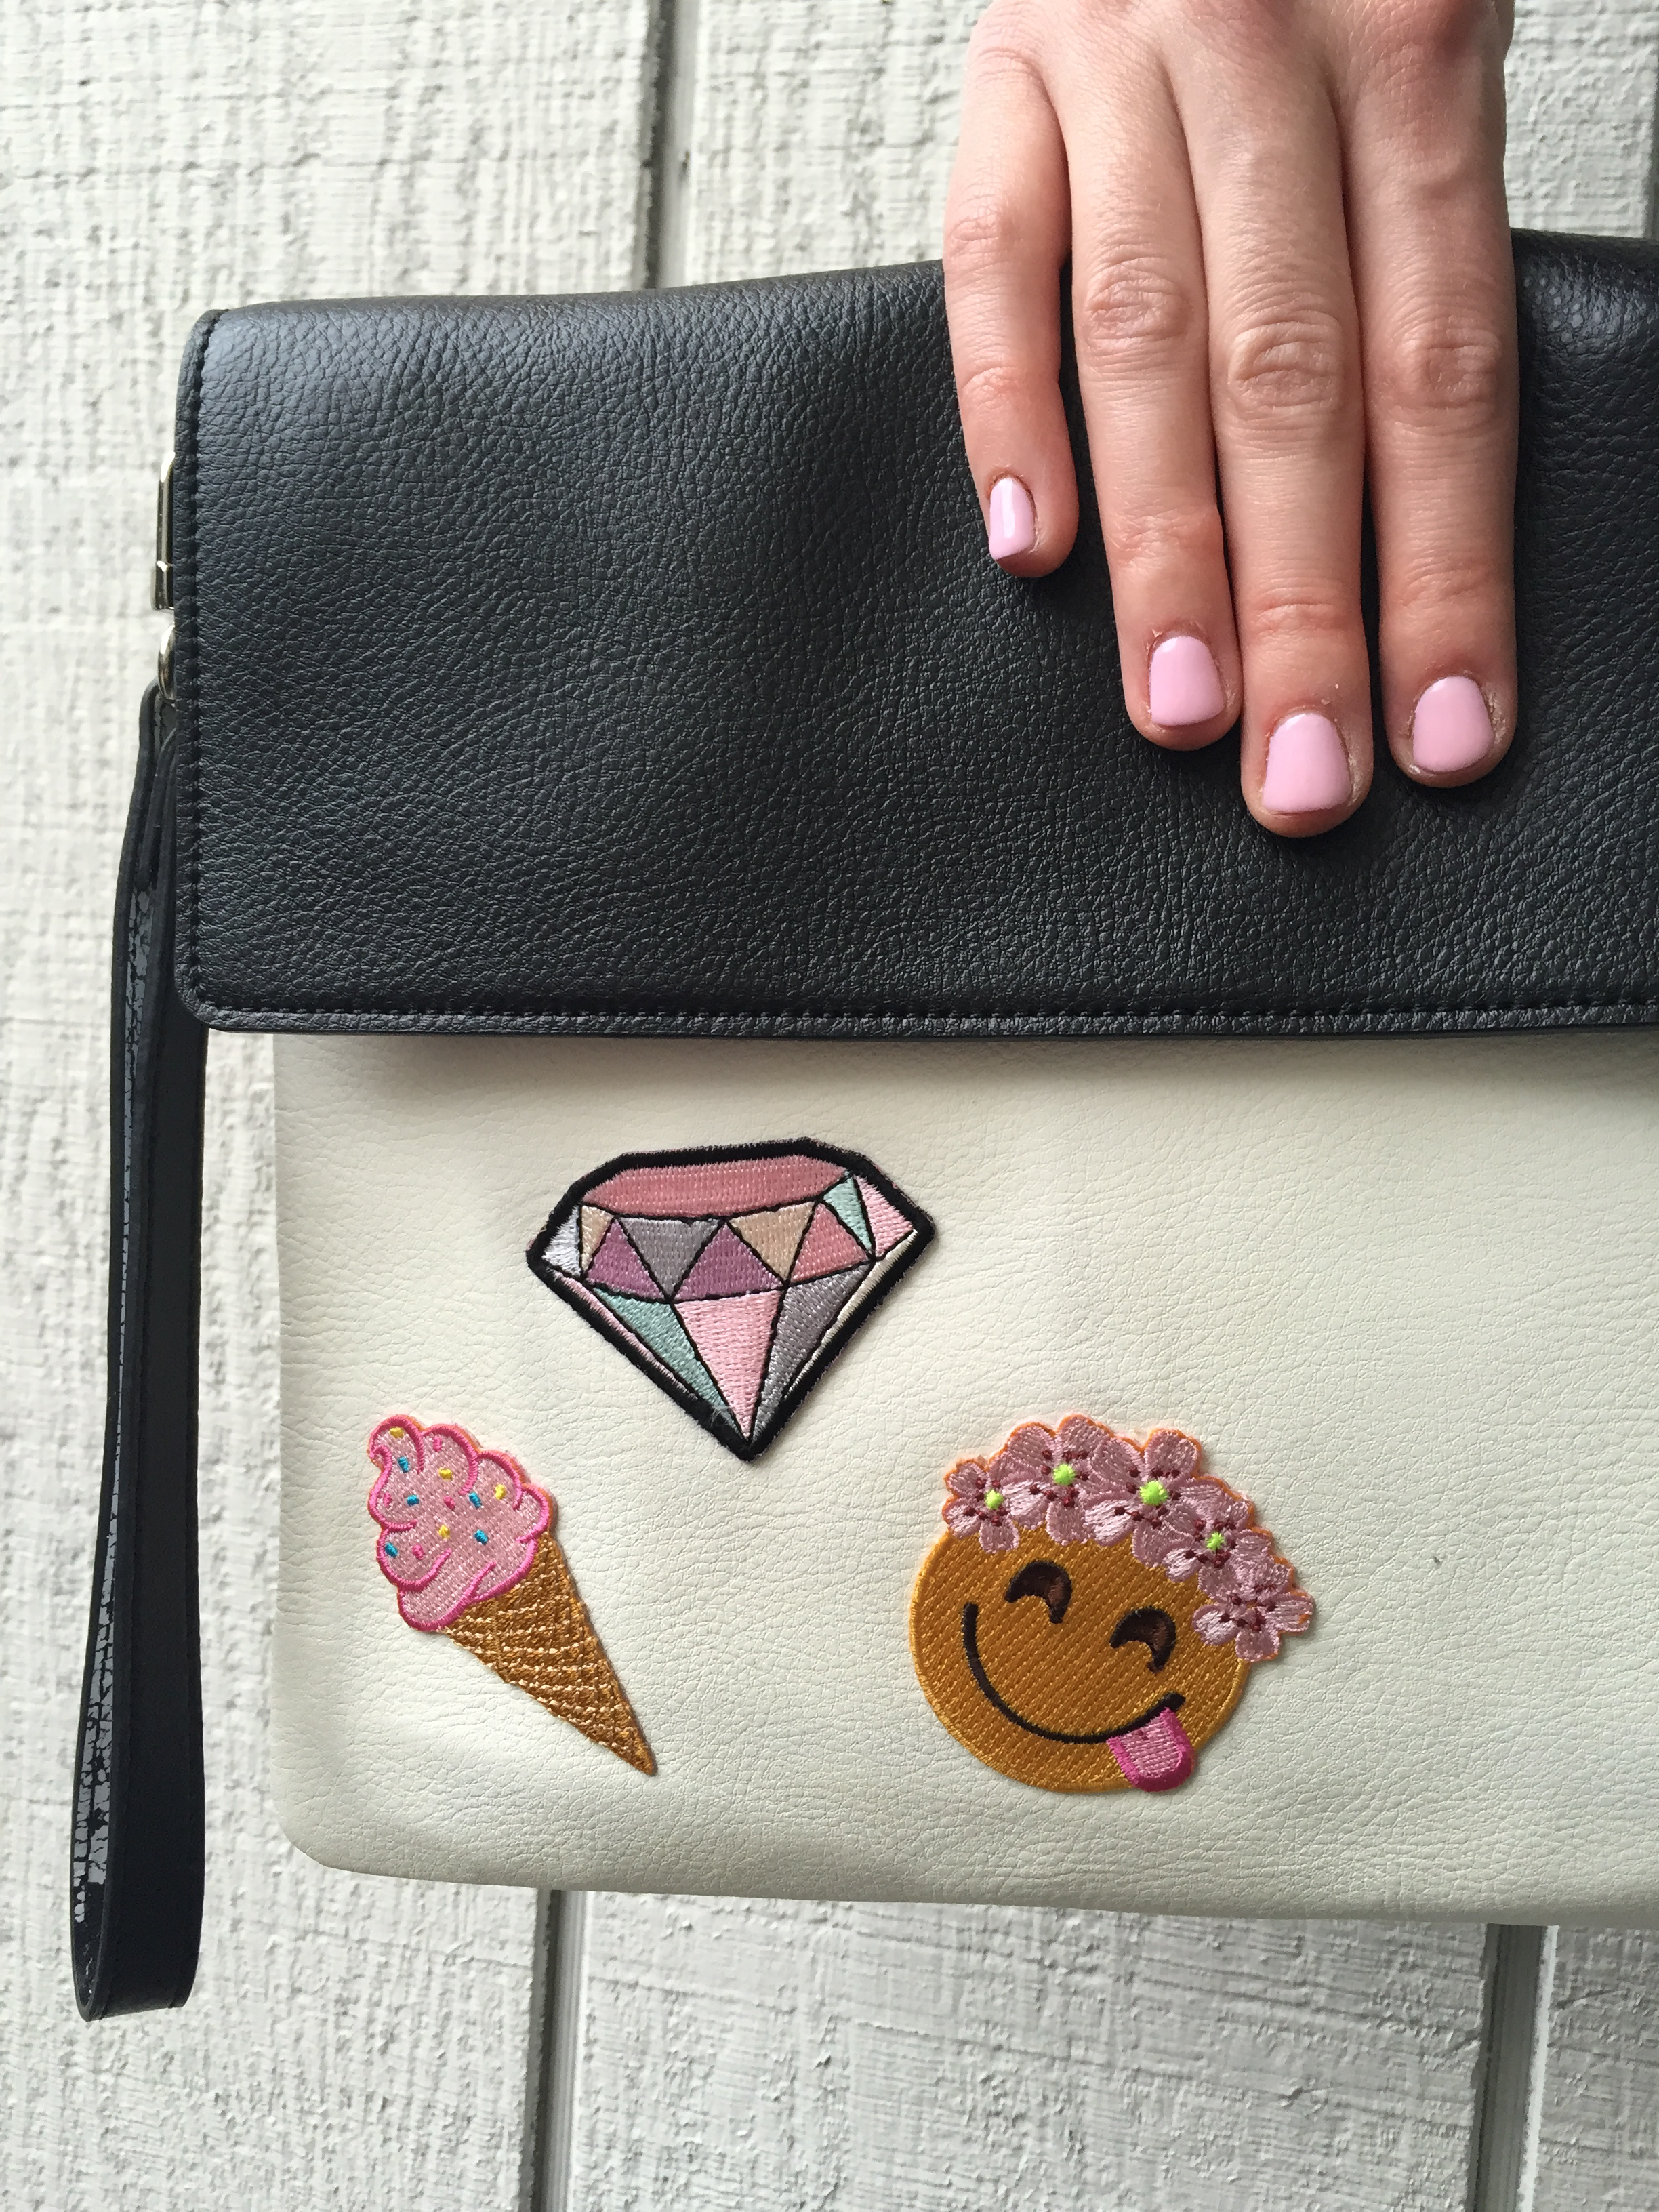 DIY Patch Covered Purses! Keeping My #Patchgame Strong! - Brite